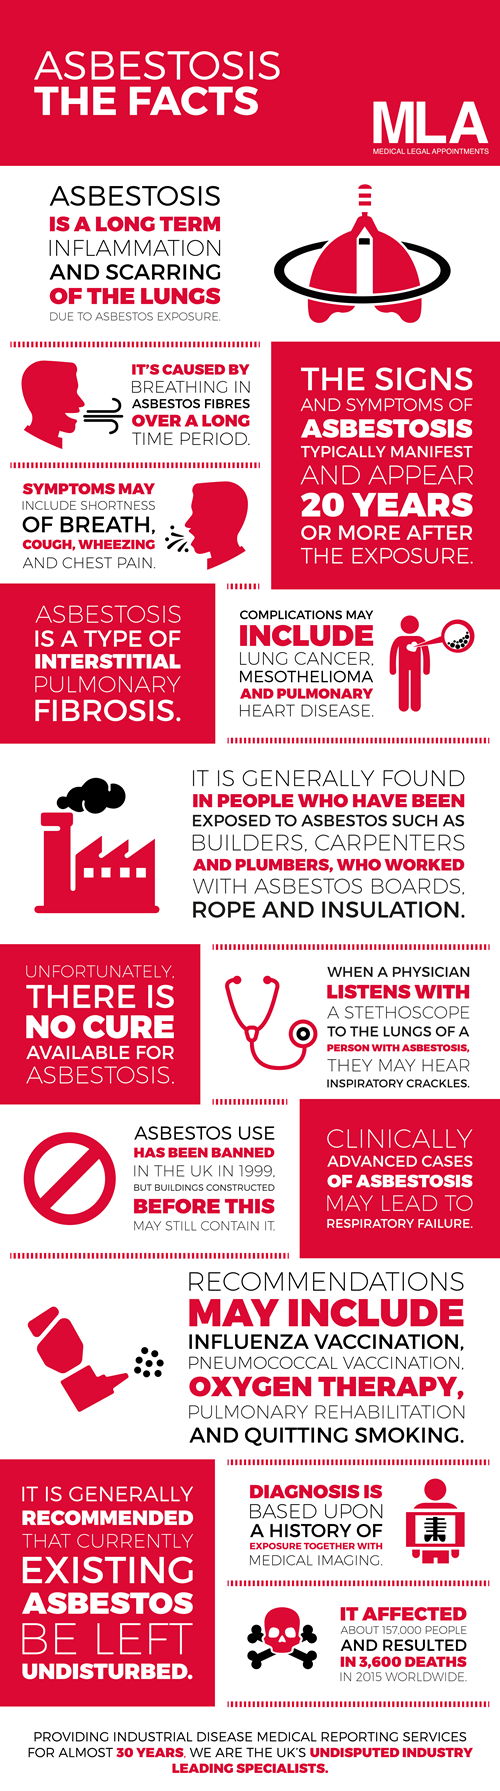 Asbestosis - the facts